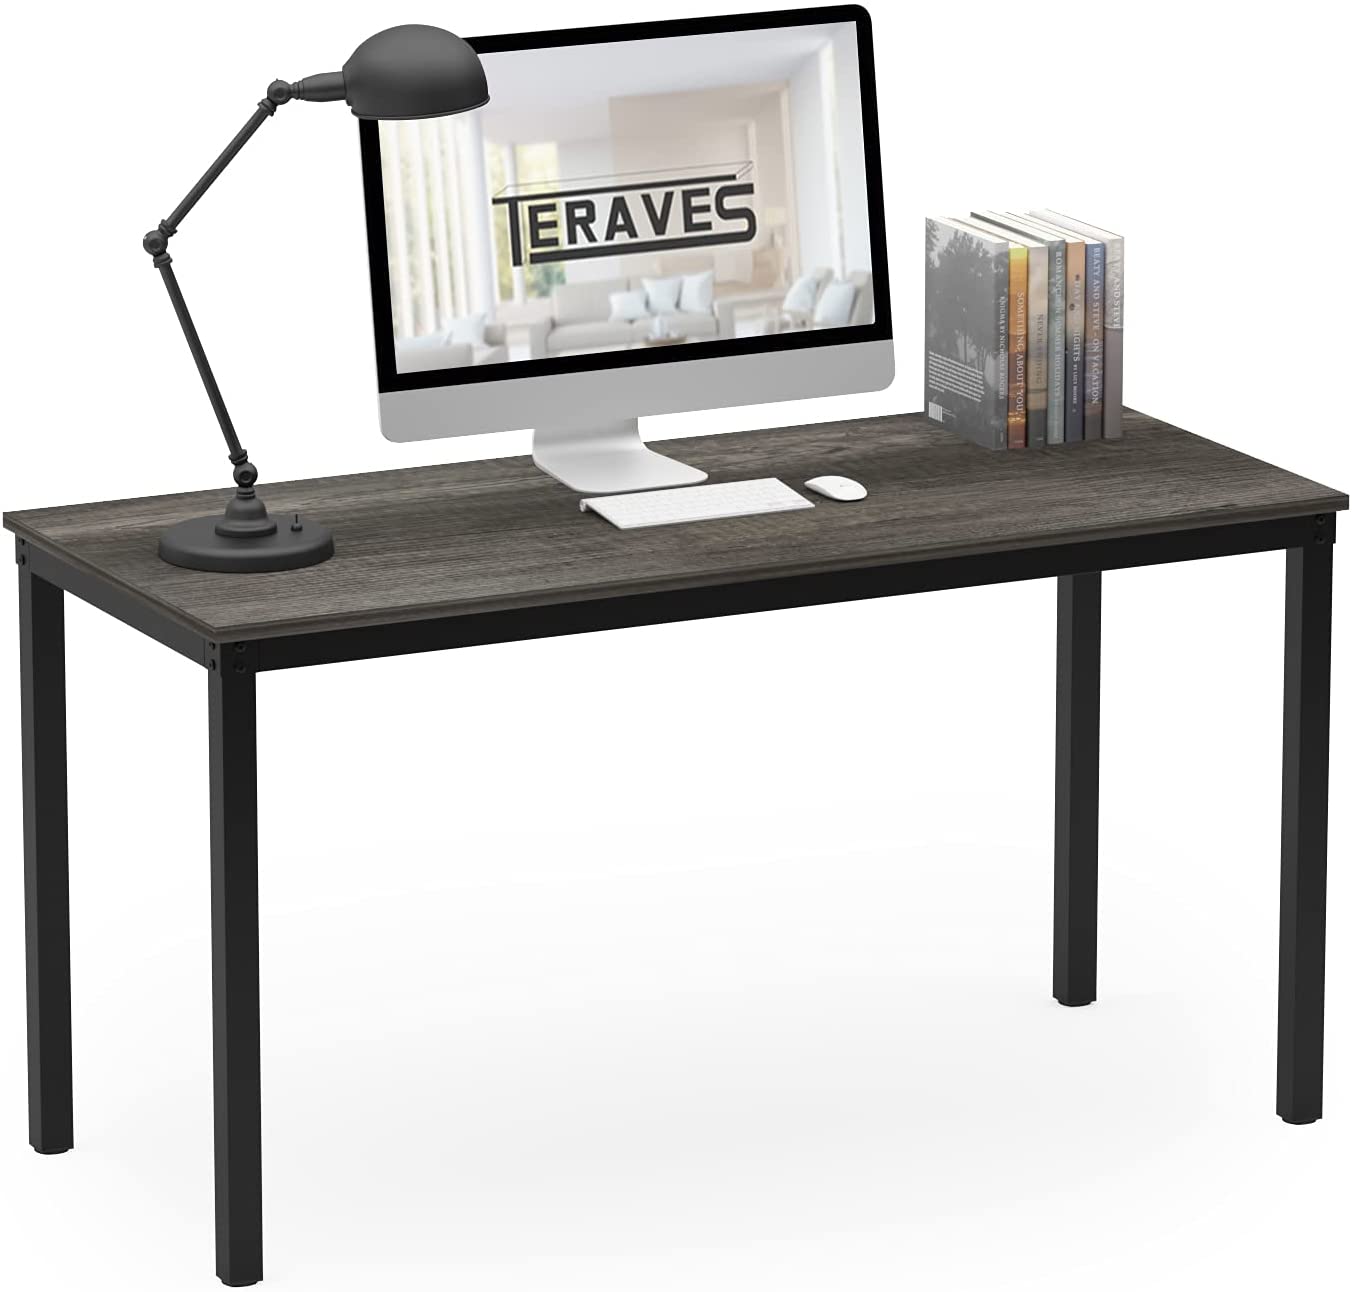 Photo 1 of Teraves Computer DeskDining Table Office Desk Sturdy Writing Workstation for Home Office 4724 Black Oak